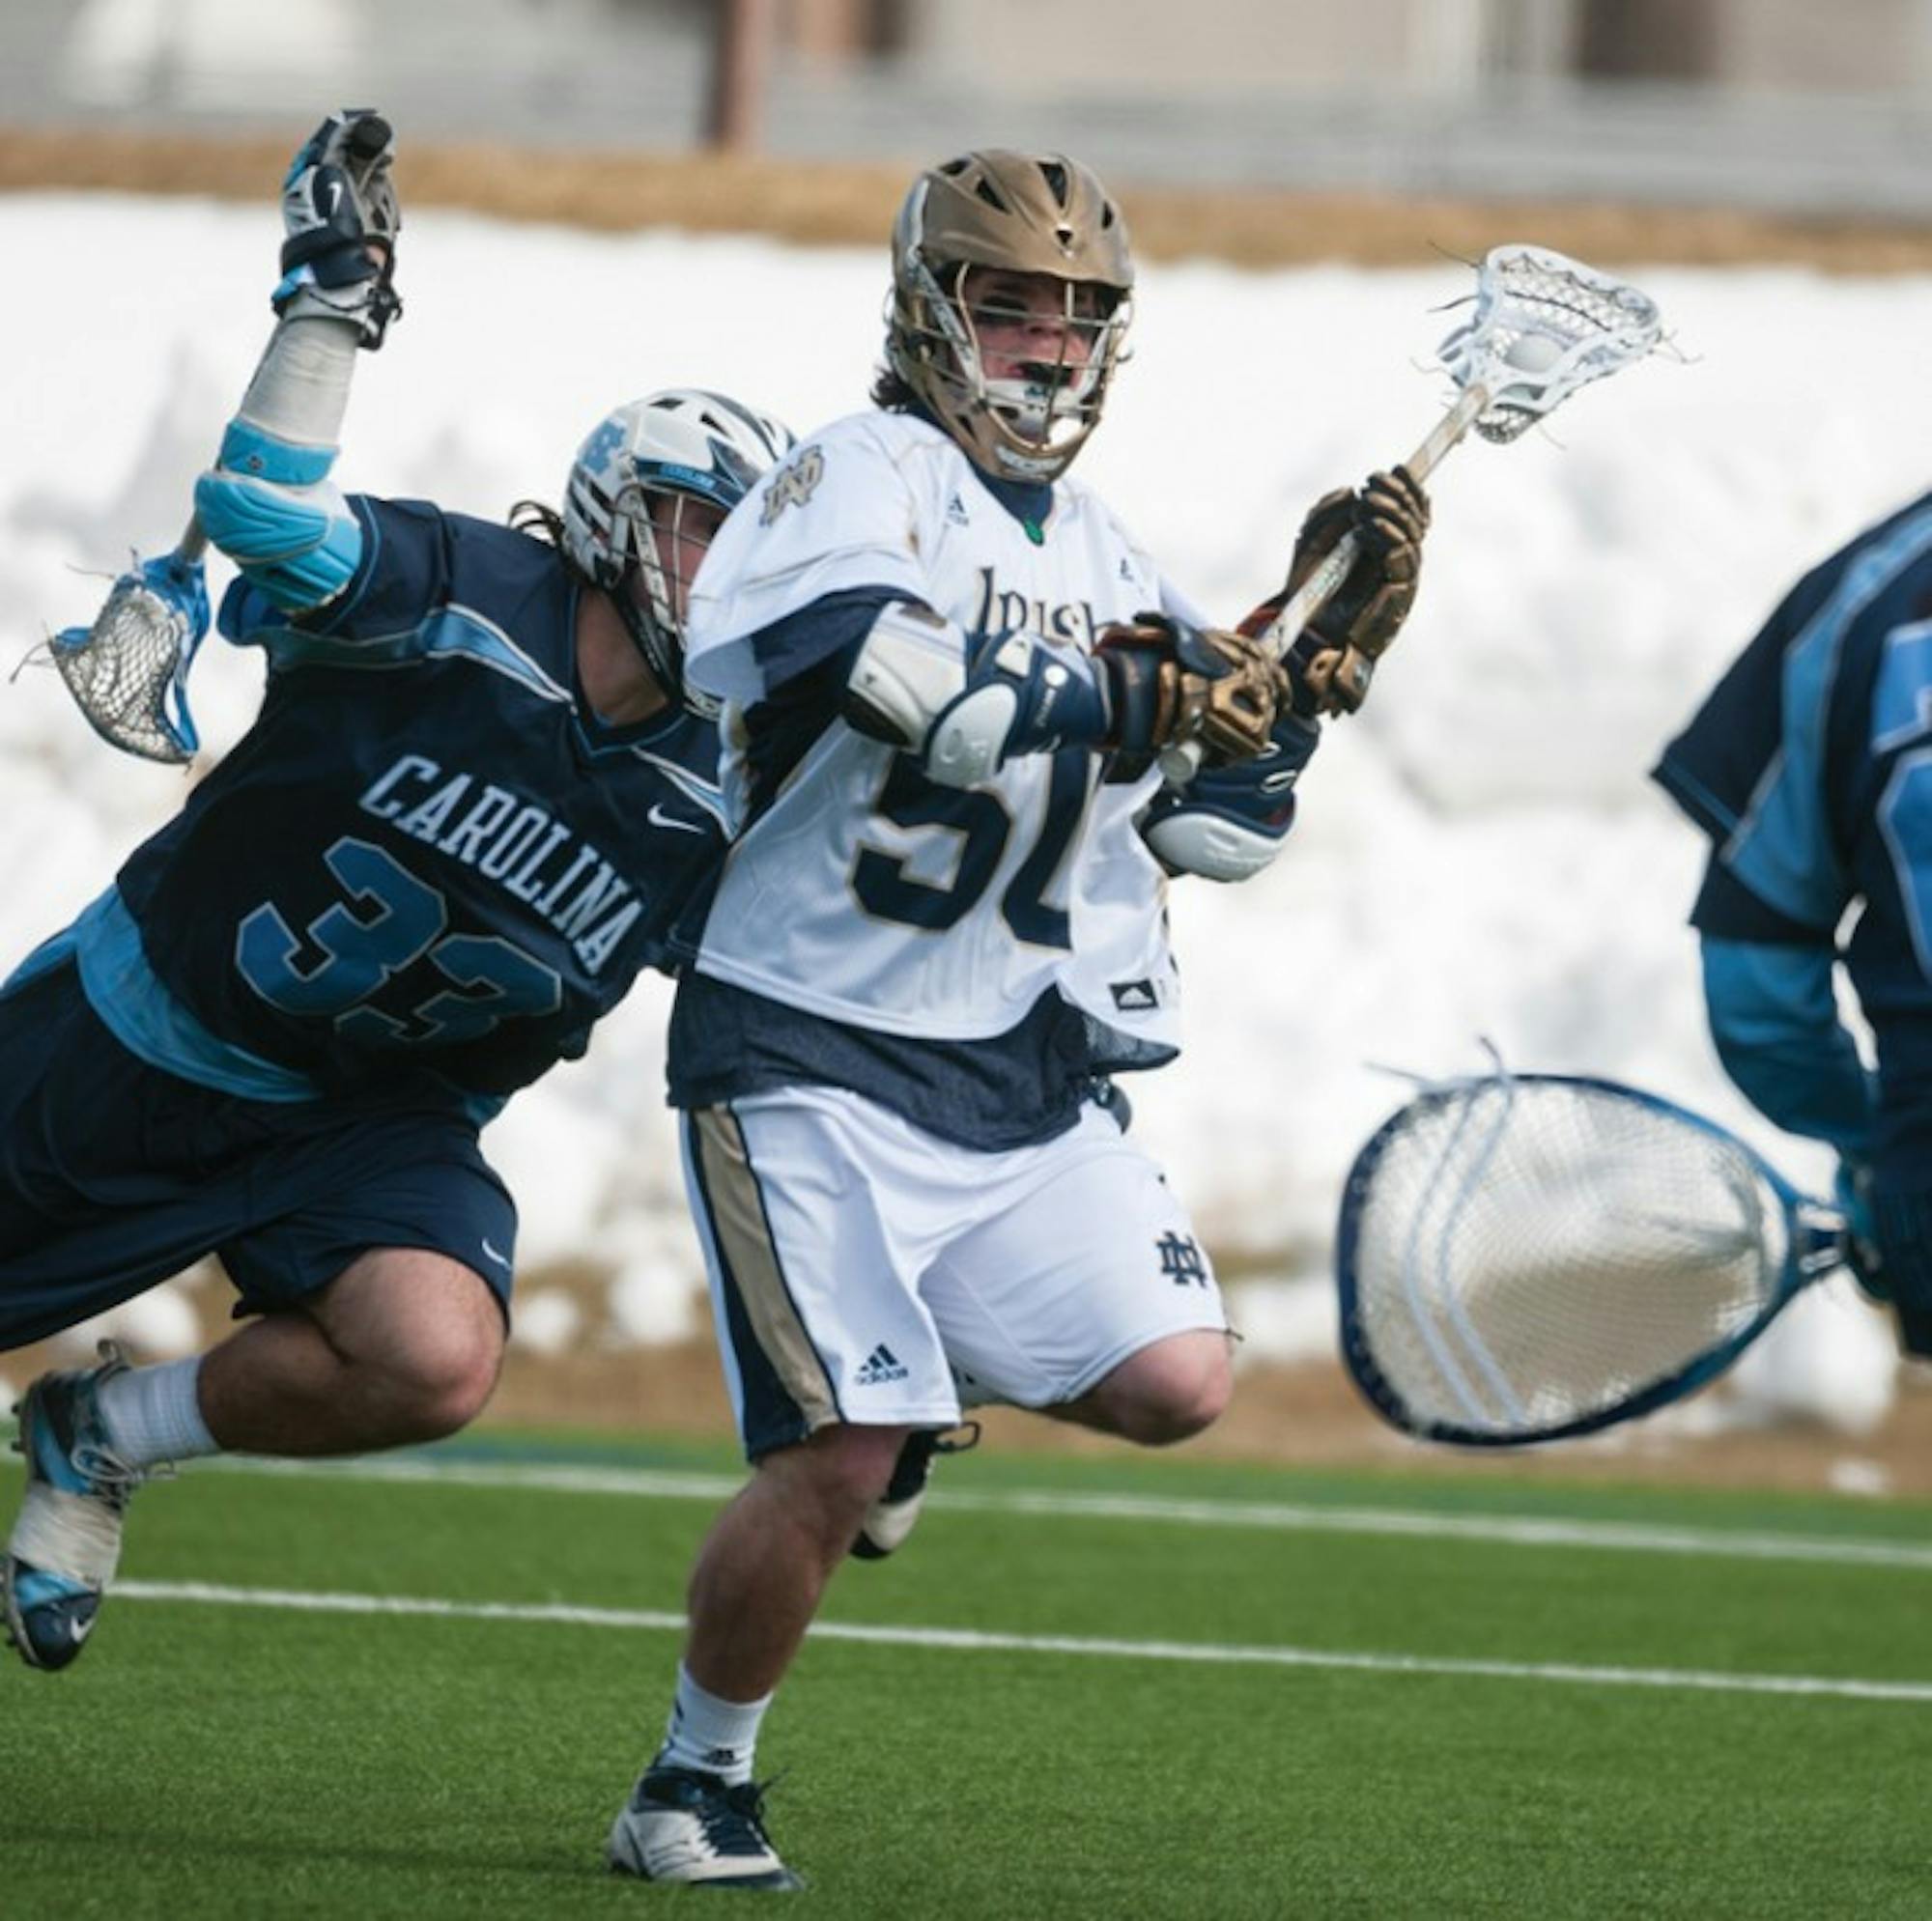 Sophomore attackman Matt Kavanagh looks to shoot against North Carolina March 2, 2013. He is Notre Dame’s top returning scorer.